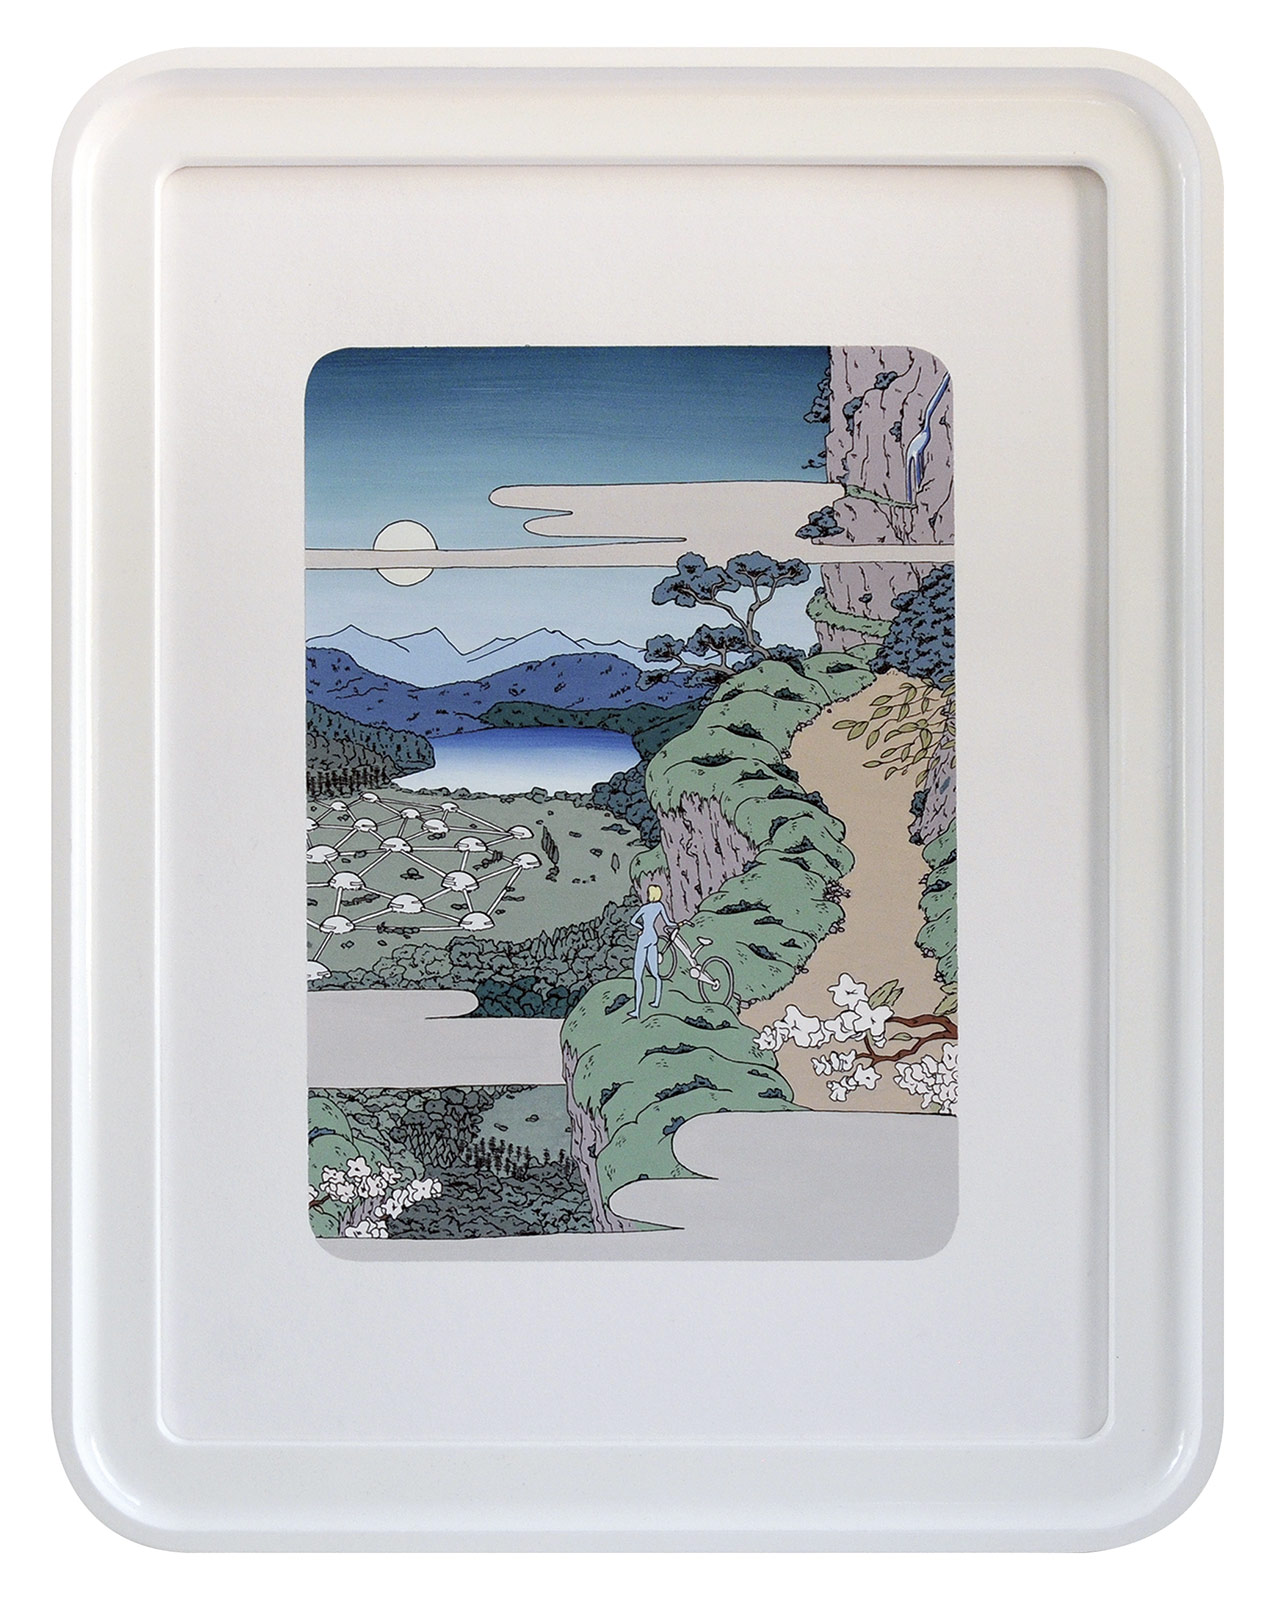 «The Hydrogen Island, Utopian-entropic prints», 2012, Gouache and ink on paper, 40 x 30 cm.